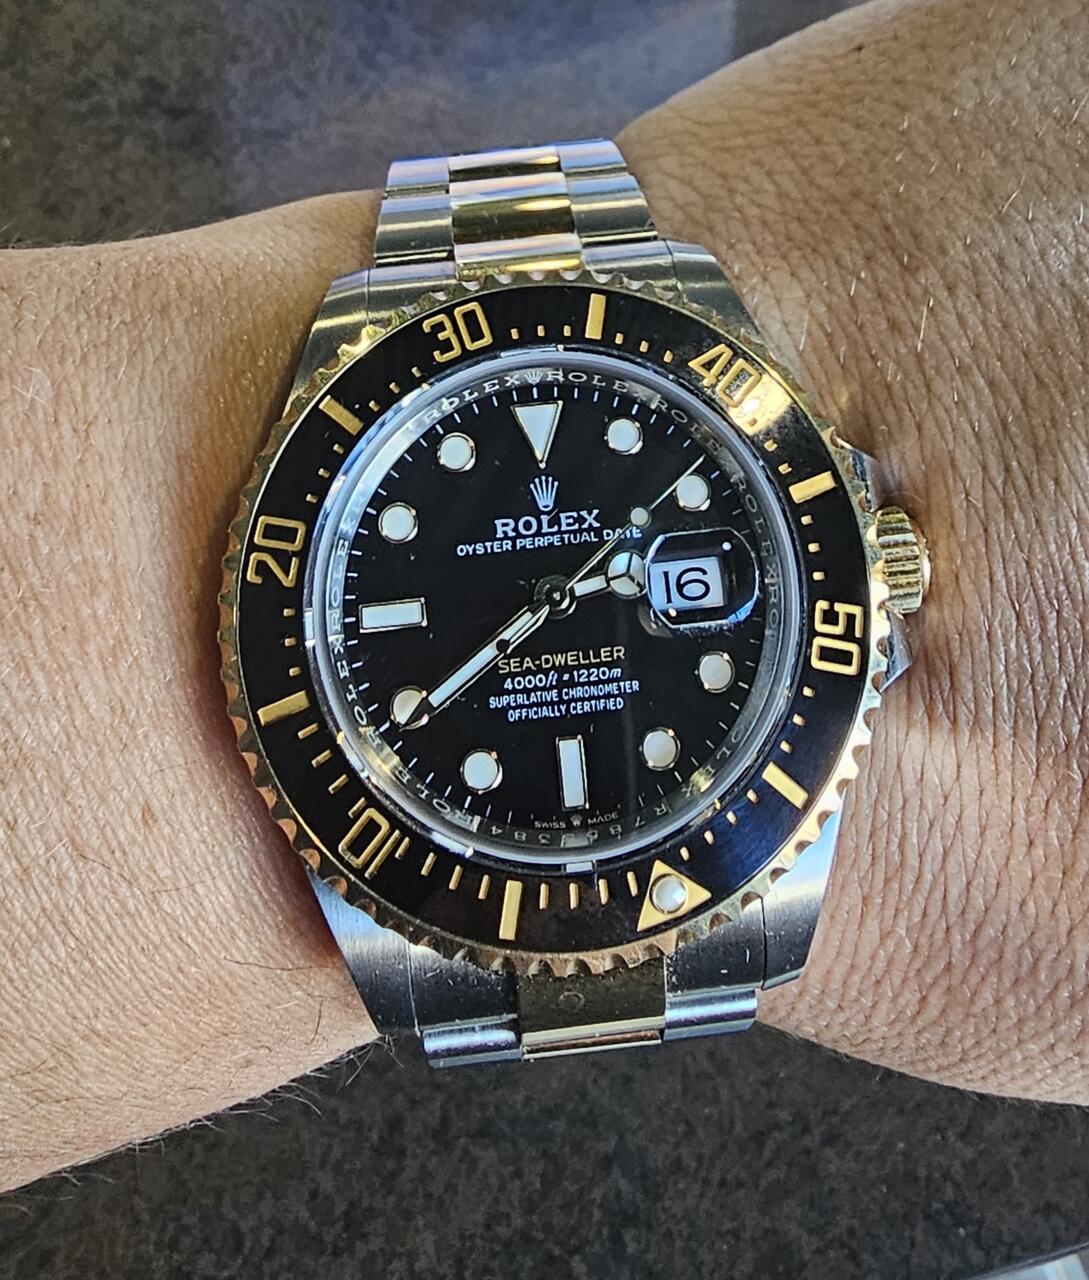 Wrist Shot Friday! - Page 131 - Beyond.ca - Car Forums